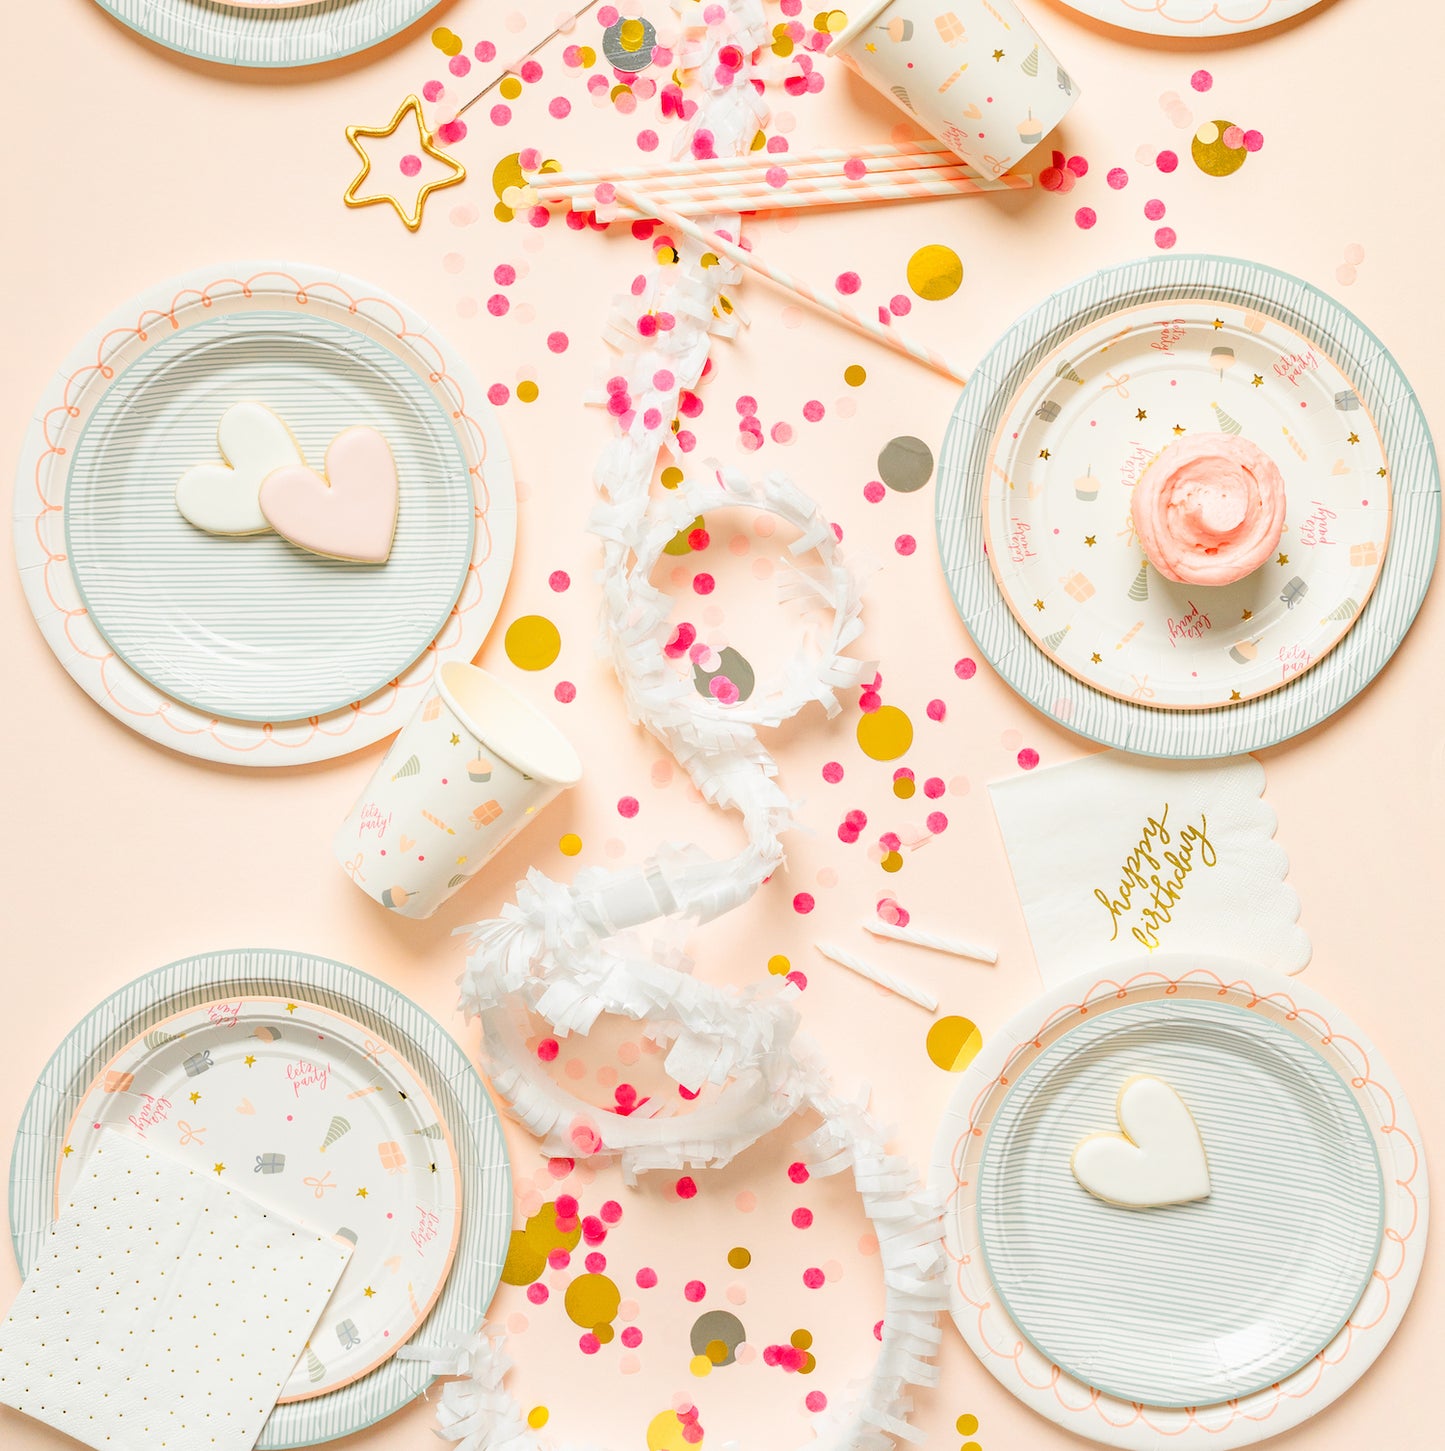 Birthday party tablescape in blue pink white and gold patterns